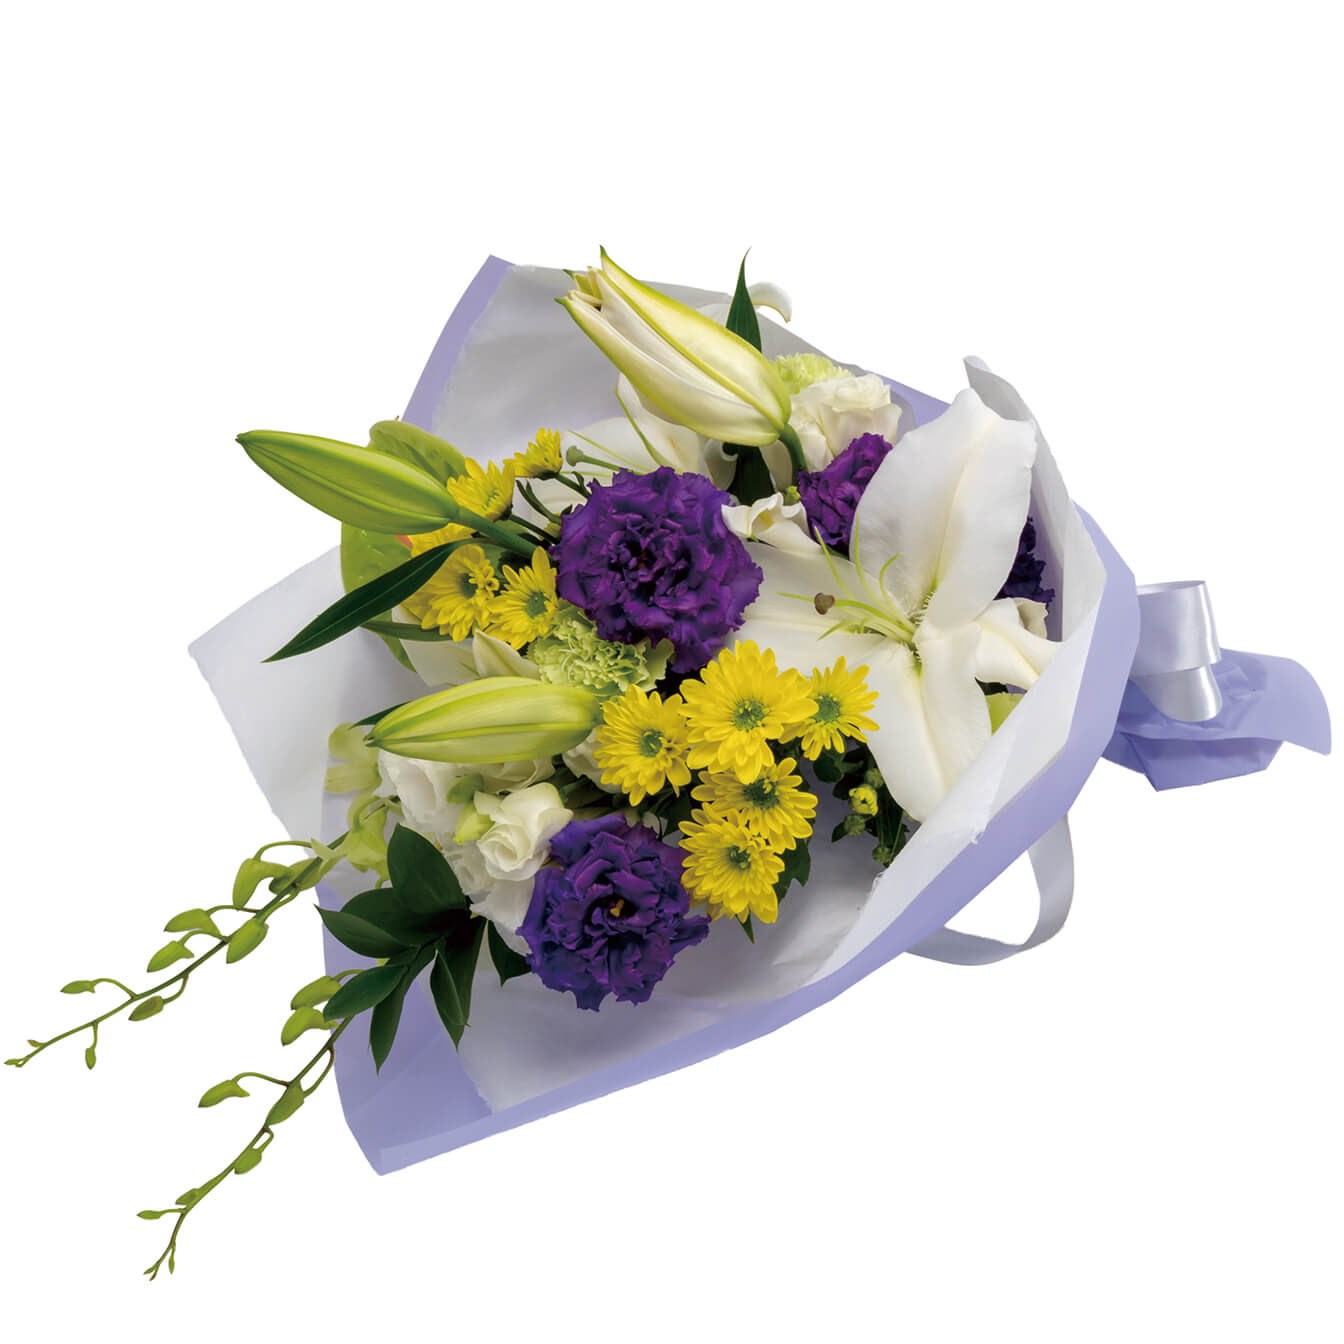 product image for Obon (Buddhist memorial service) sympathy bouquet